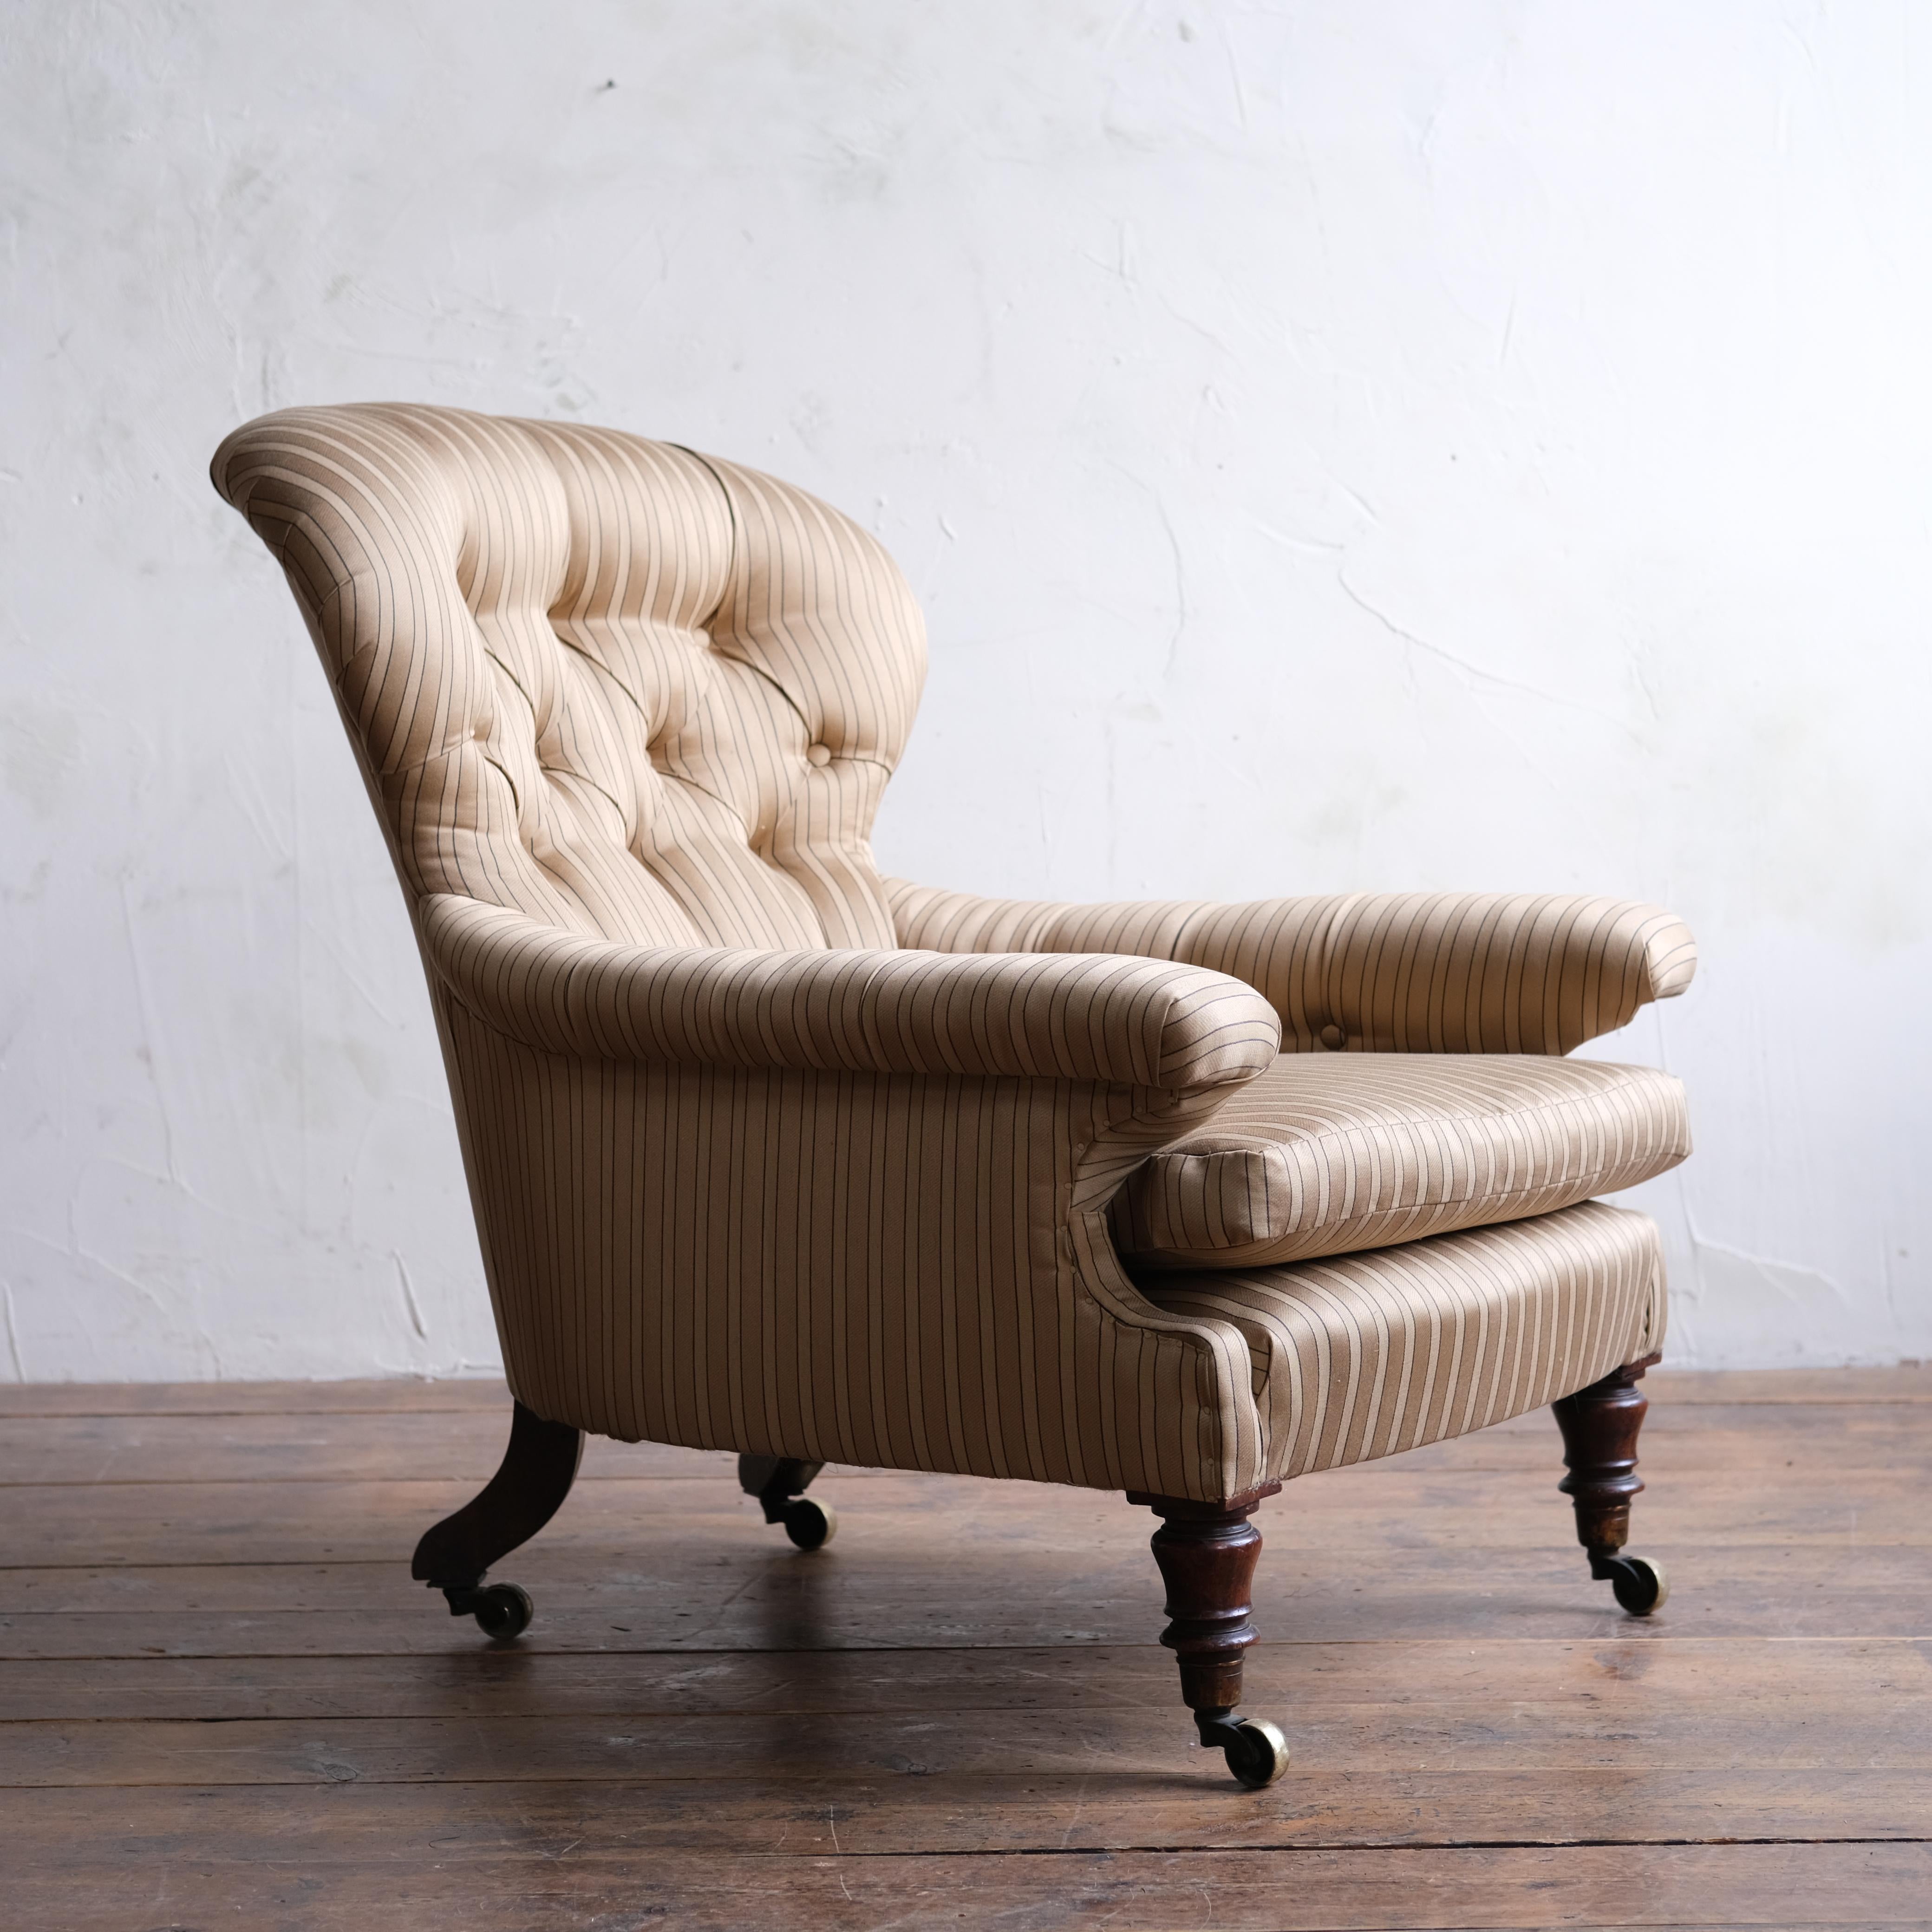 A superb mid-19th century deep seated armchair by Holland & sons. Raised on walnut legs all capped with the original W Hopkins & son's brass casters. Newly upholstered in gold/charcoal Satin stripe by 